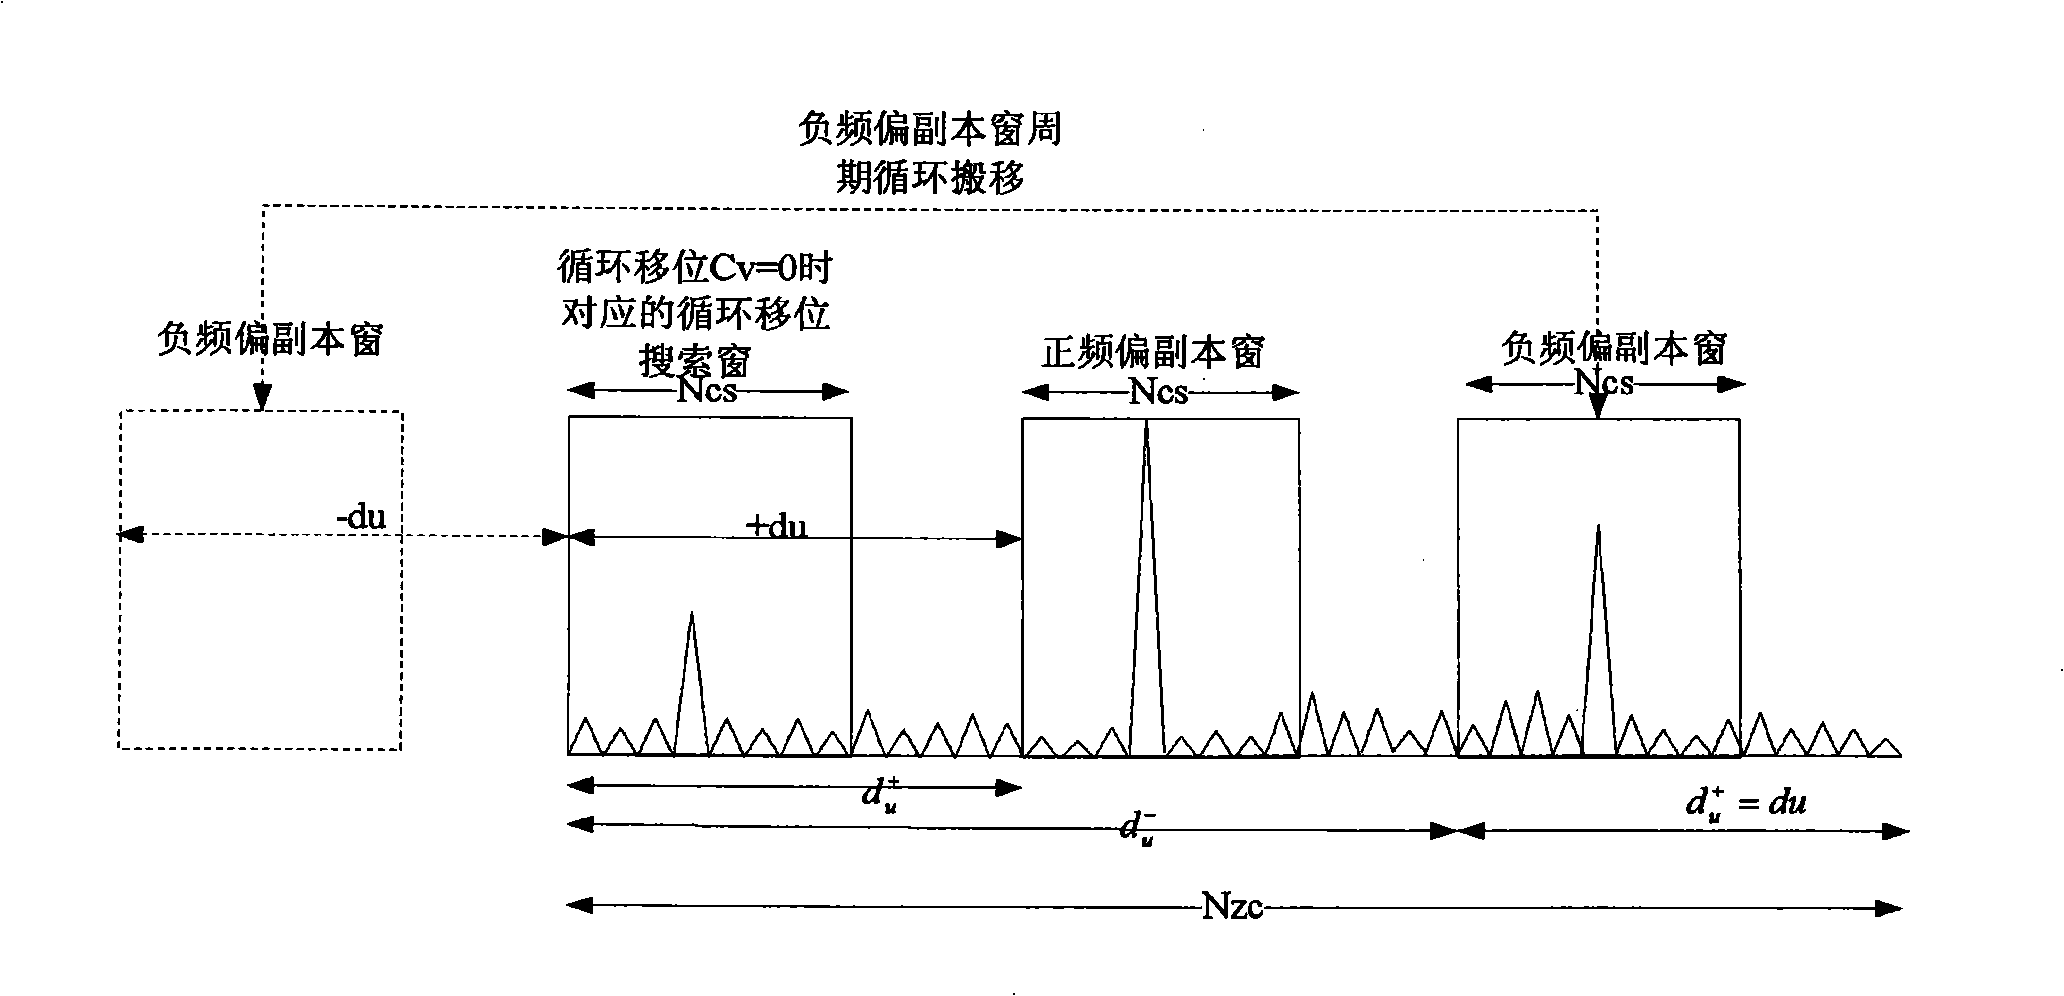 Signal detection method for stochastic access channel